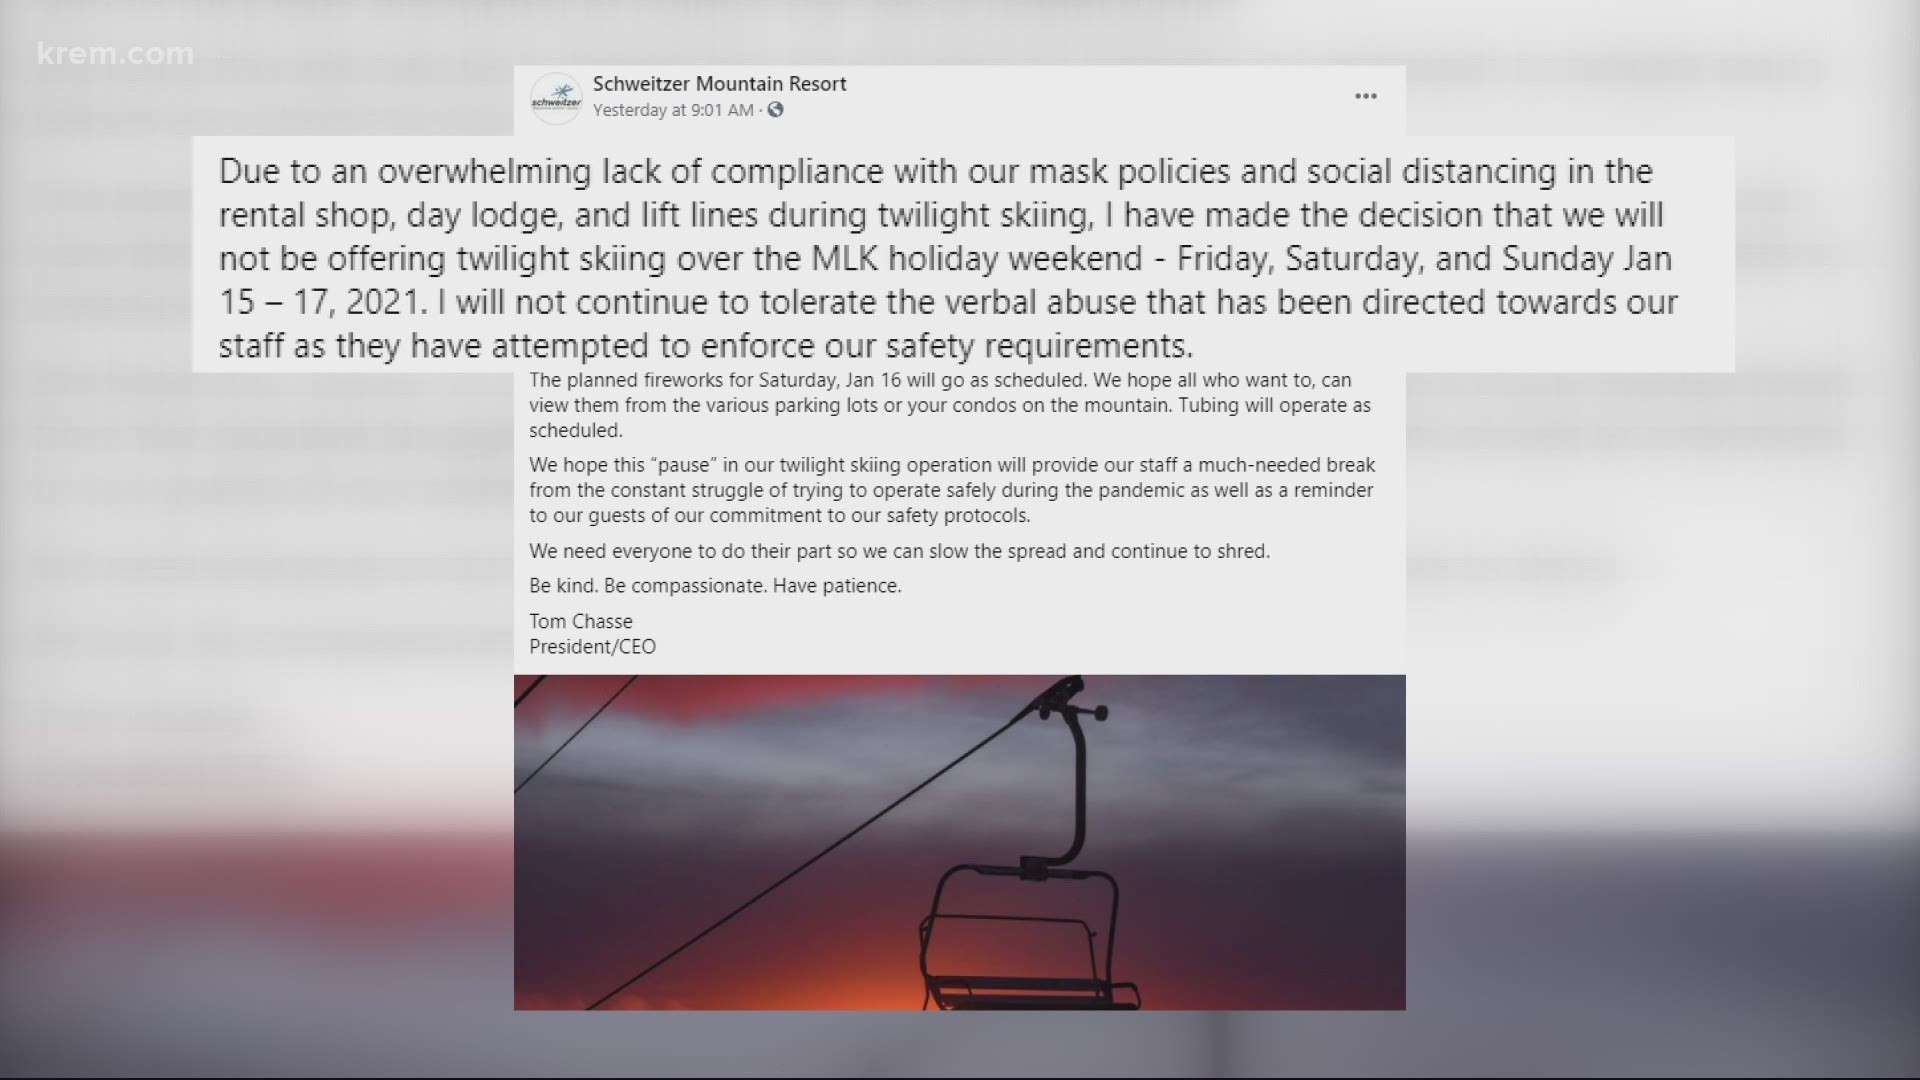 Tom Chasse, president and CEO of the ski resort in North Idaho said he "will not continue to tolerate the verbal abuse" directed at staff members.